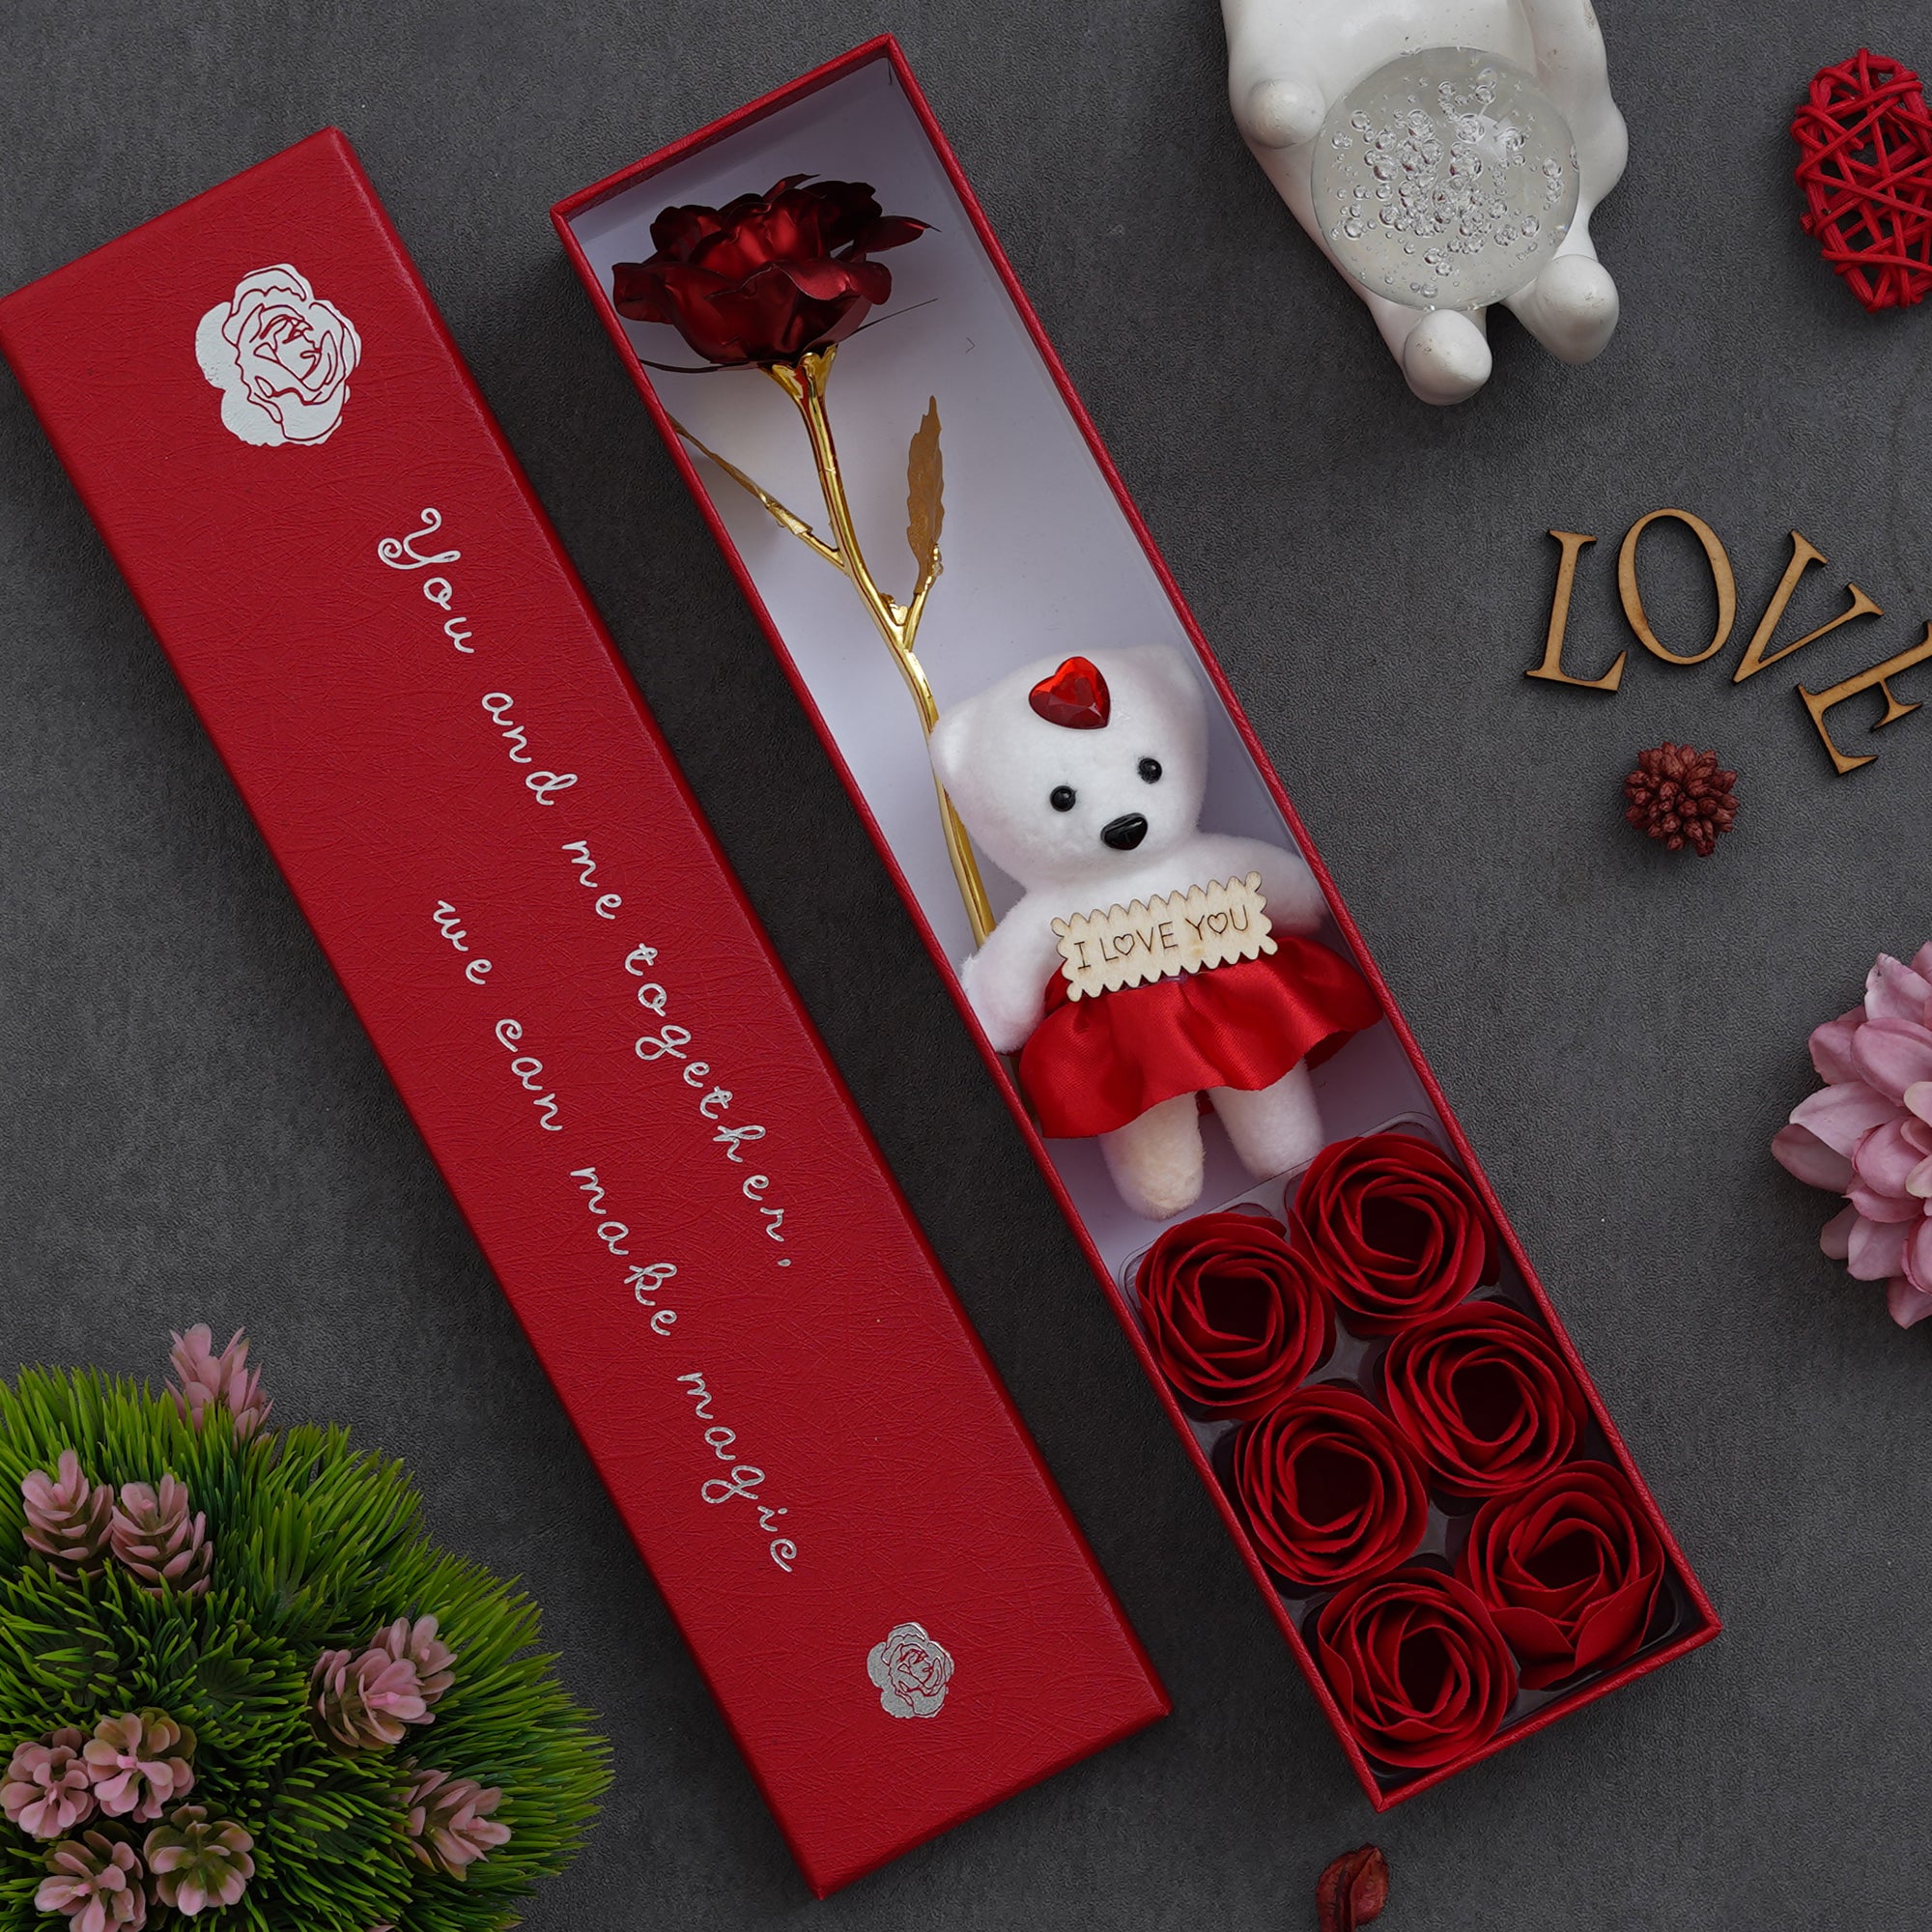 Valentine Combo of Pack of 8 Love Gift Cards, Red Gift Box with Teddy & Roses, Wooden Box "For You" Message Bottle Set 3